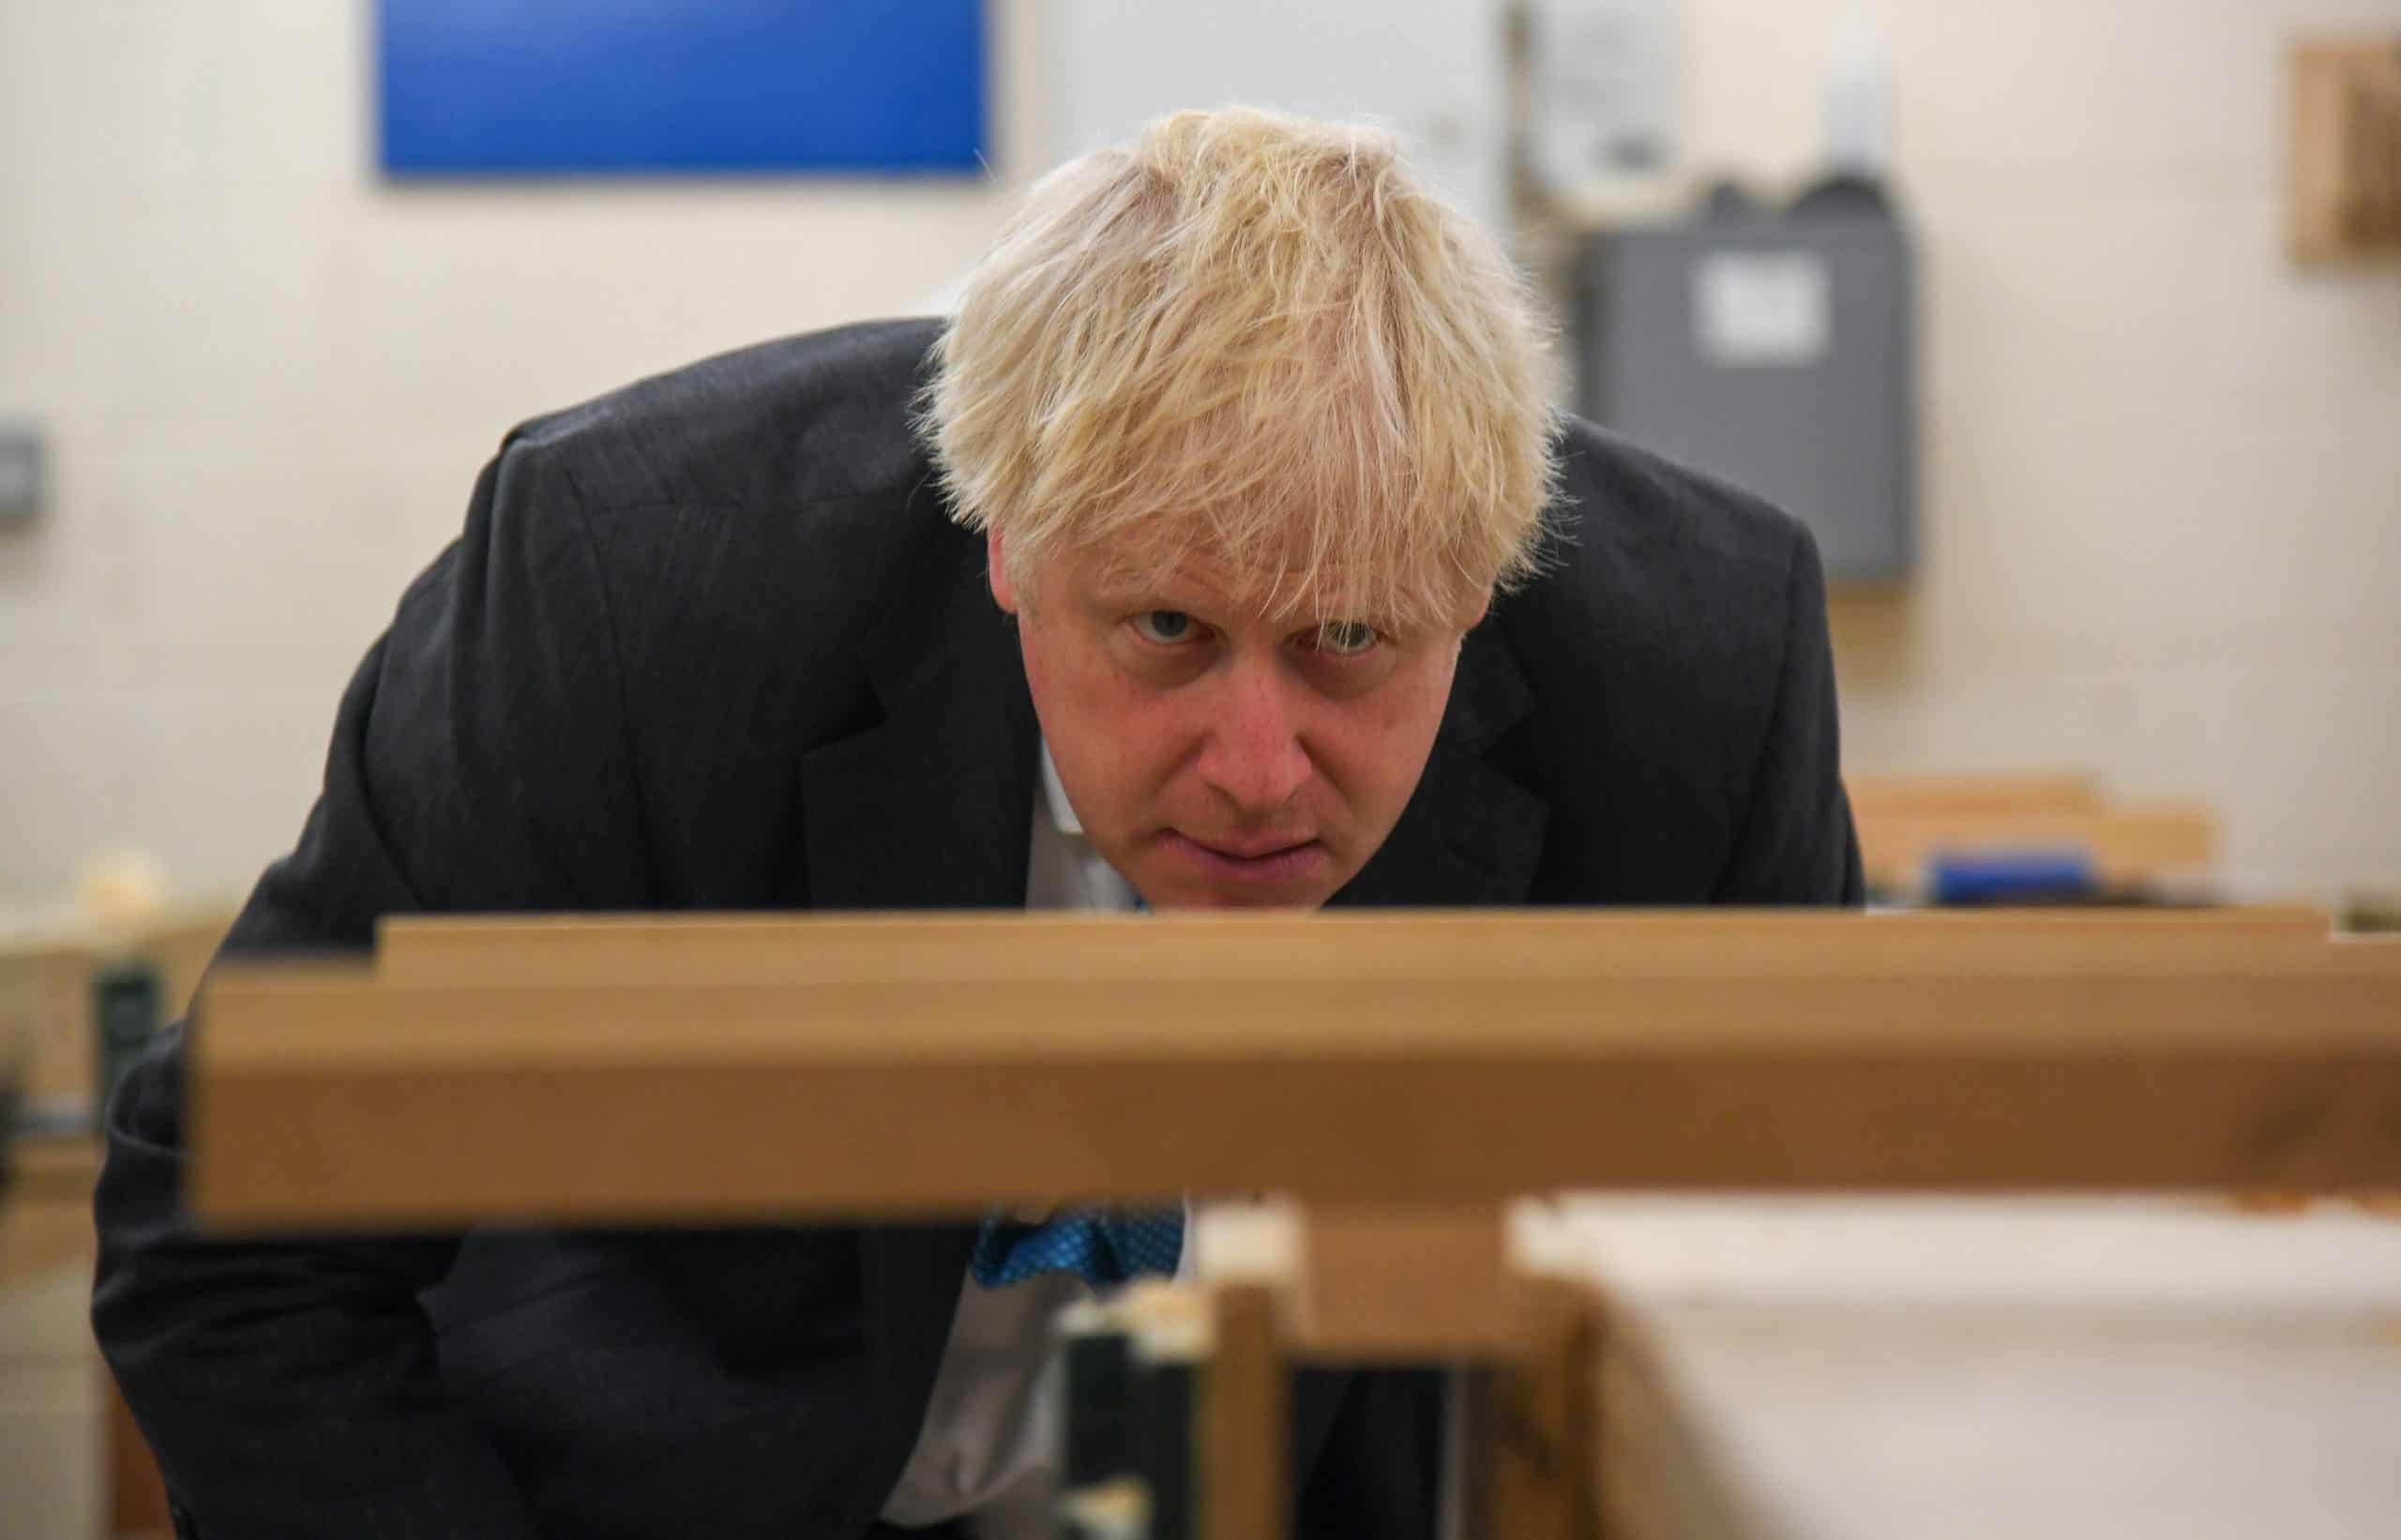 Johnson forced to apologise after fluffing North East lockdown lines